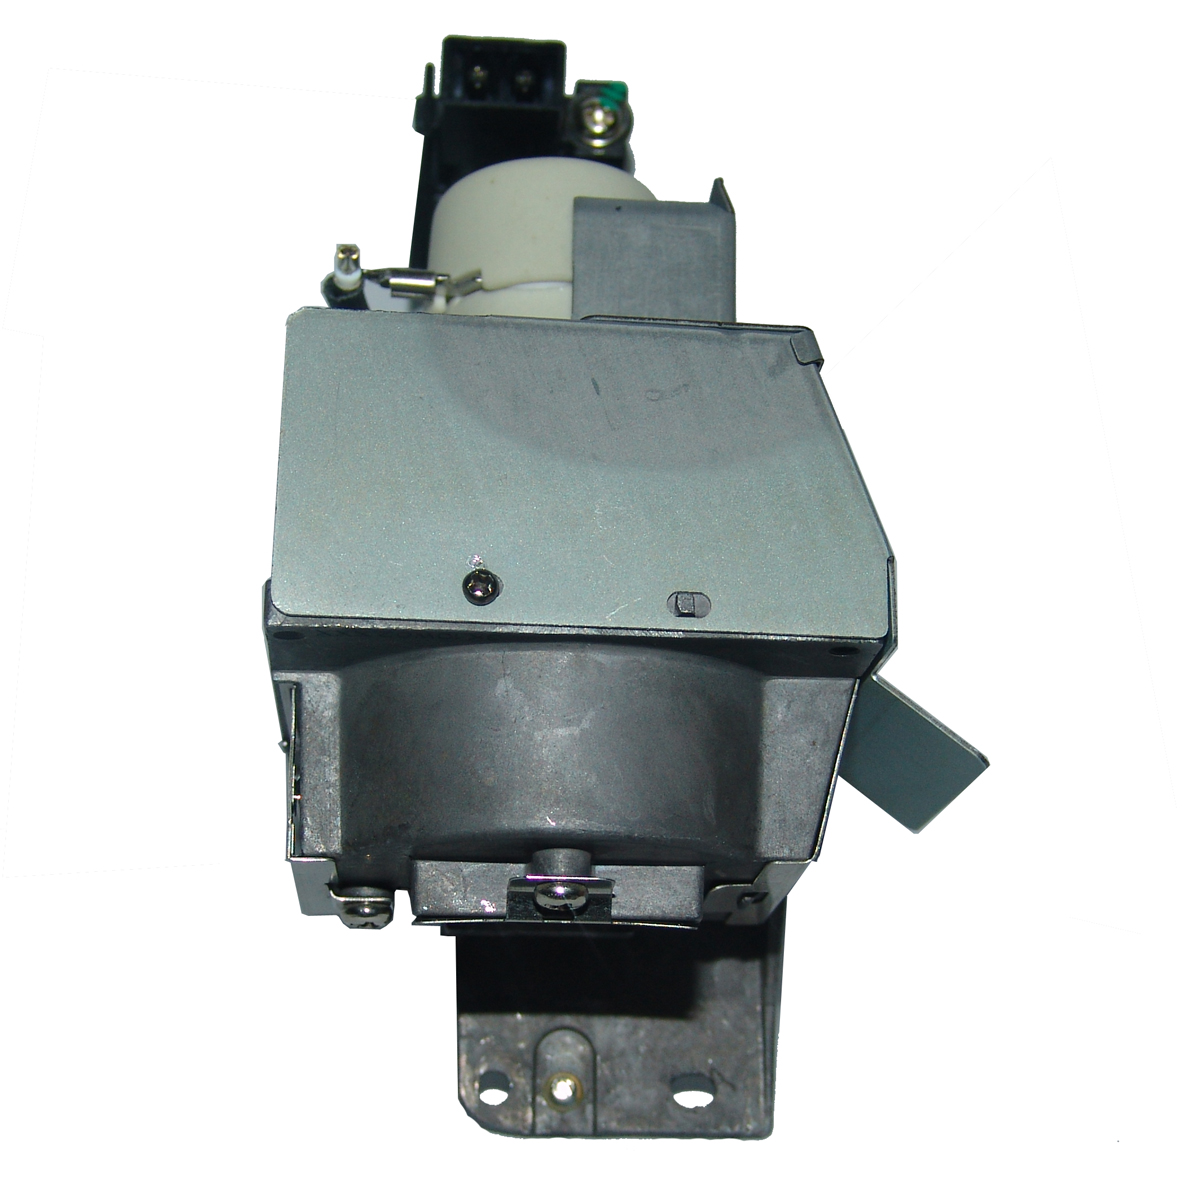 5J.J6S05.001 Lamp & Housing for BenQ Projectors - 90 Day Warranty - image 3 of 5